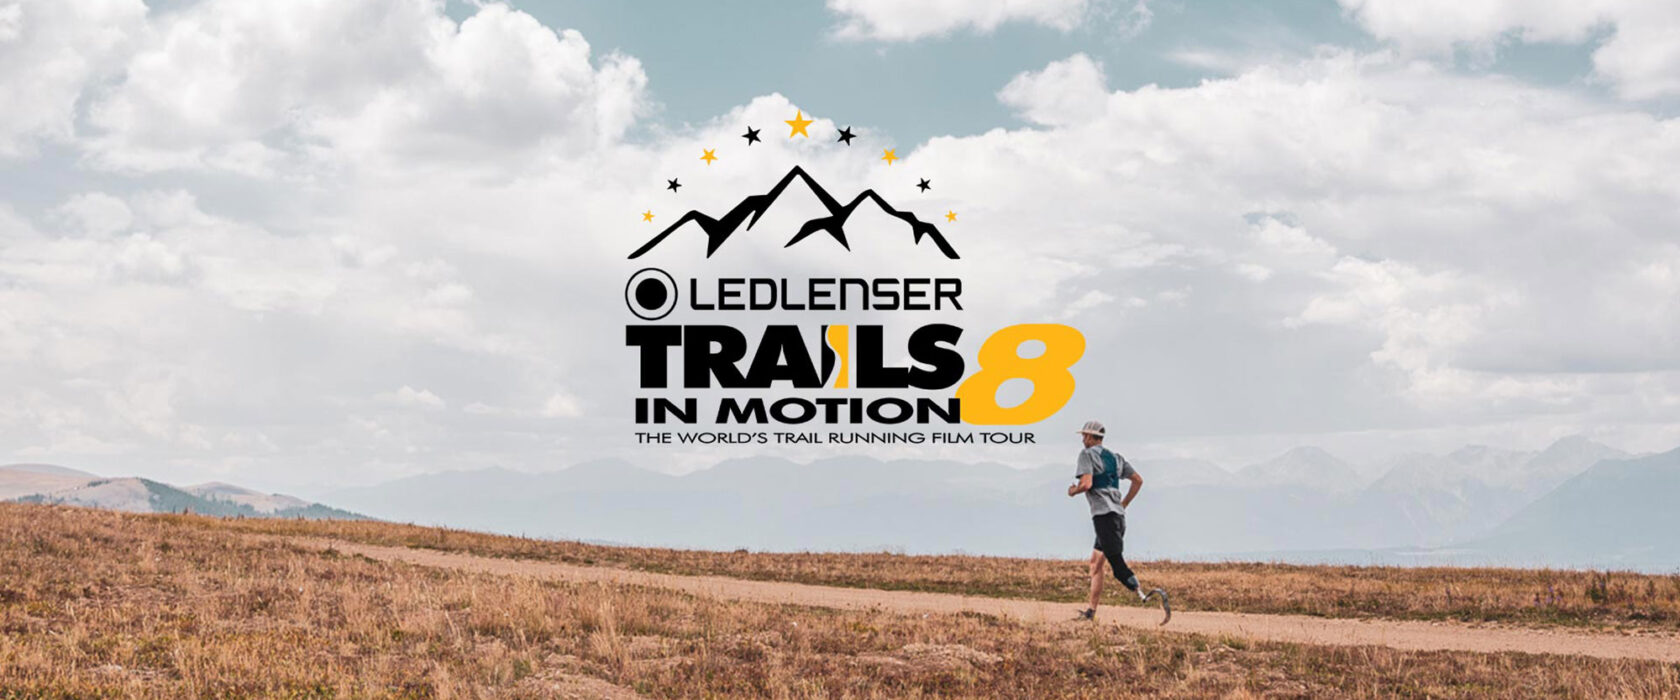 Trails-in-Motion-FIlm-Tour-2020